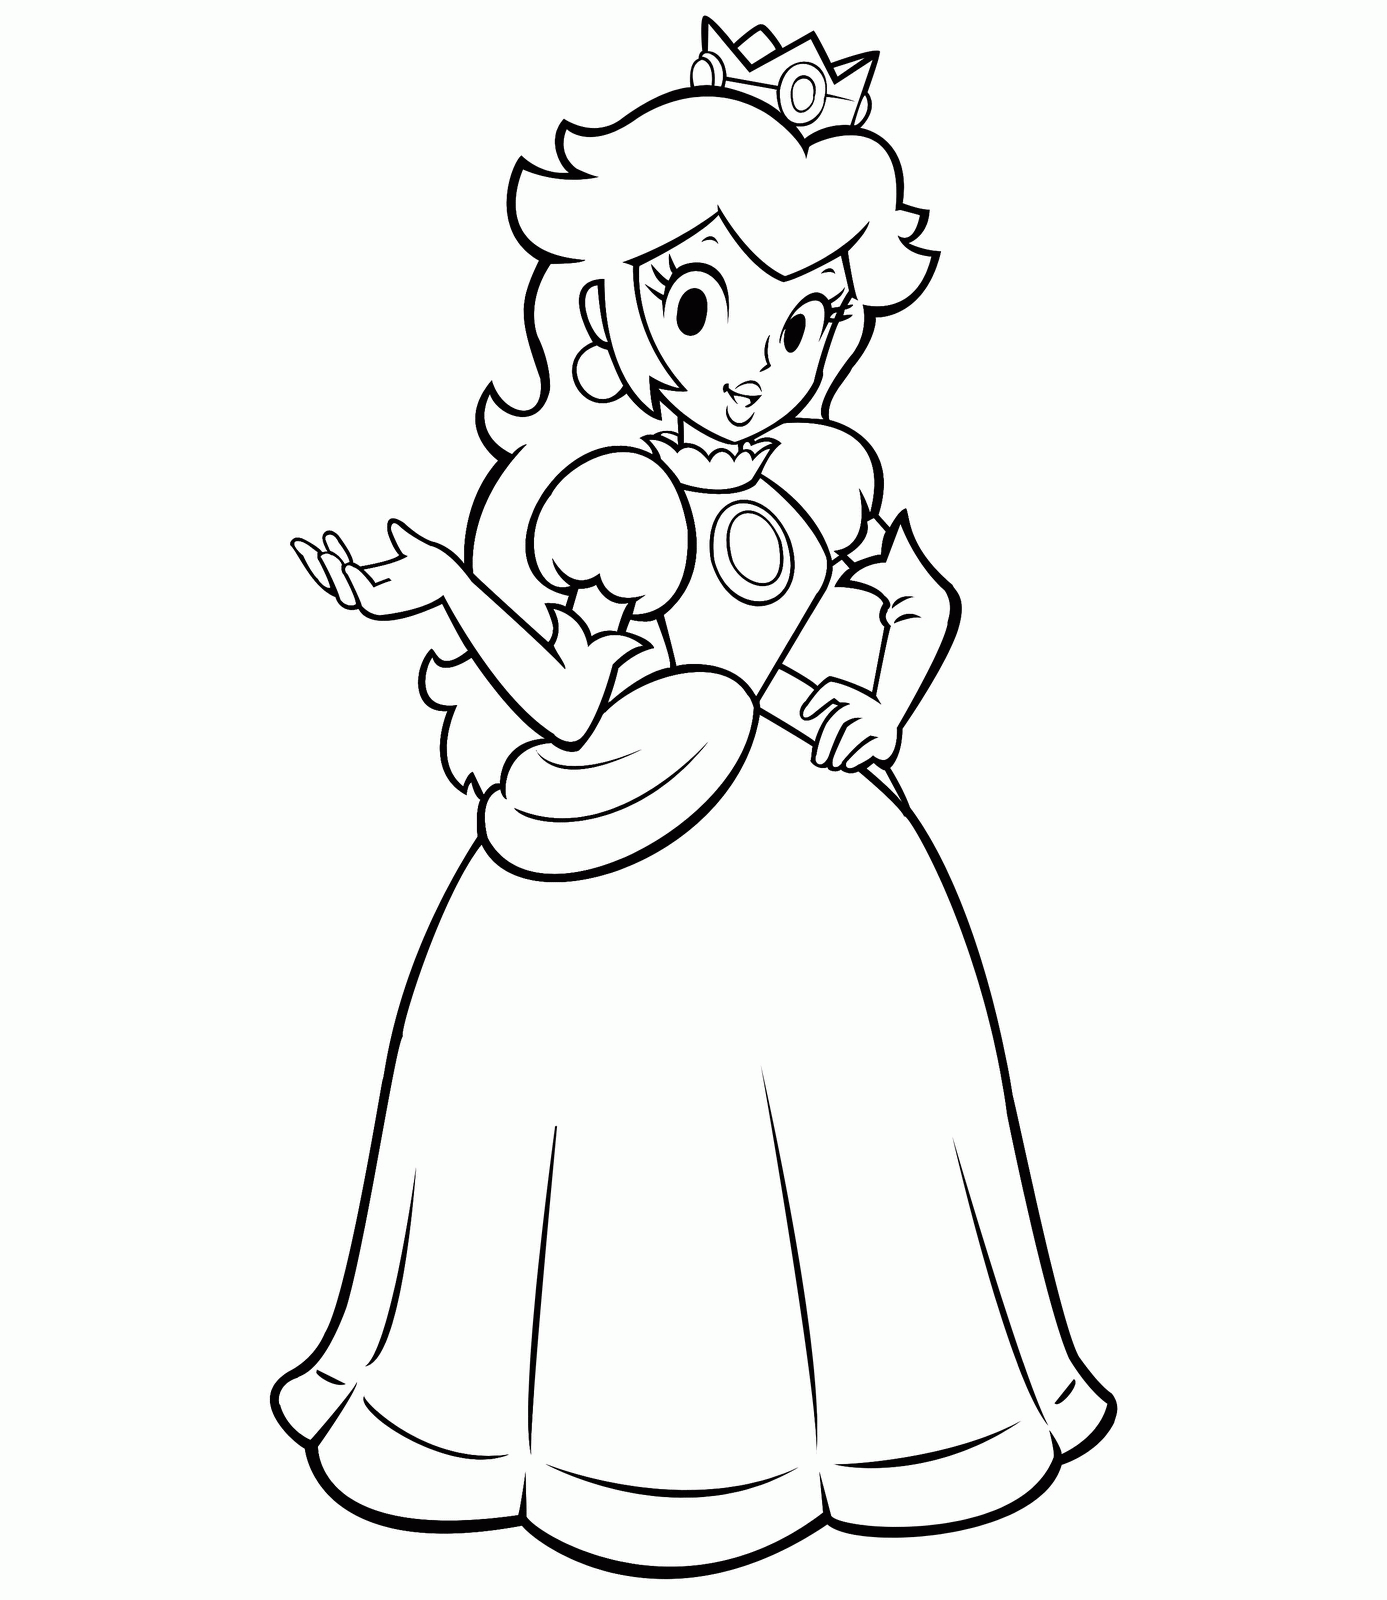 Princess Peach Coloring Pages To Print Free   Coloring Home